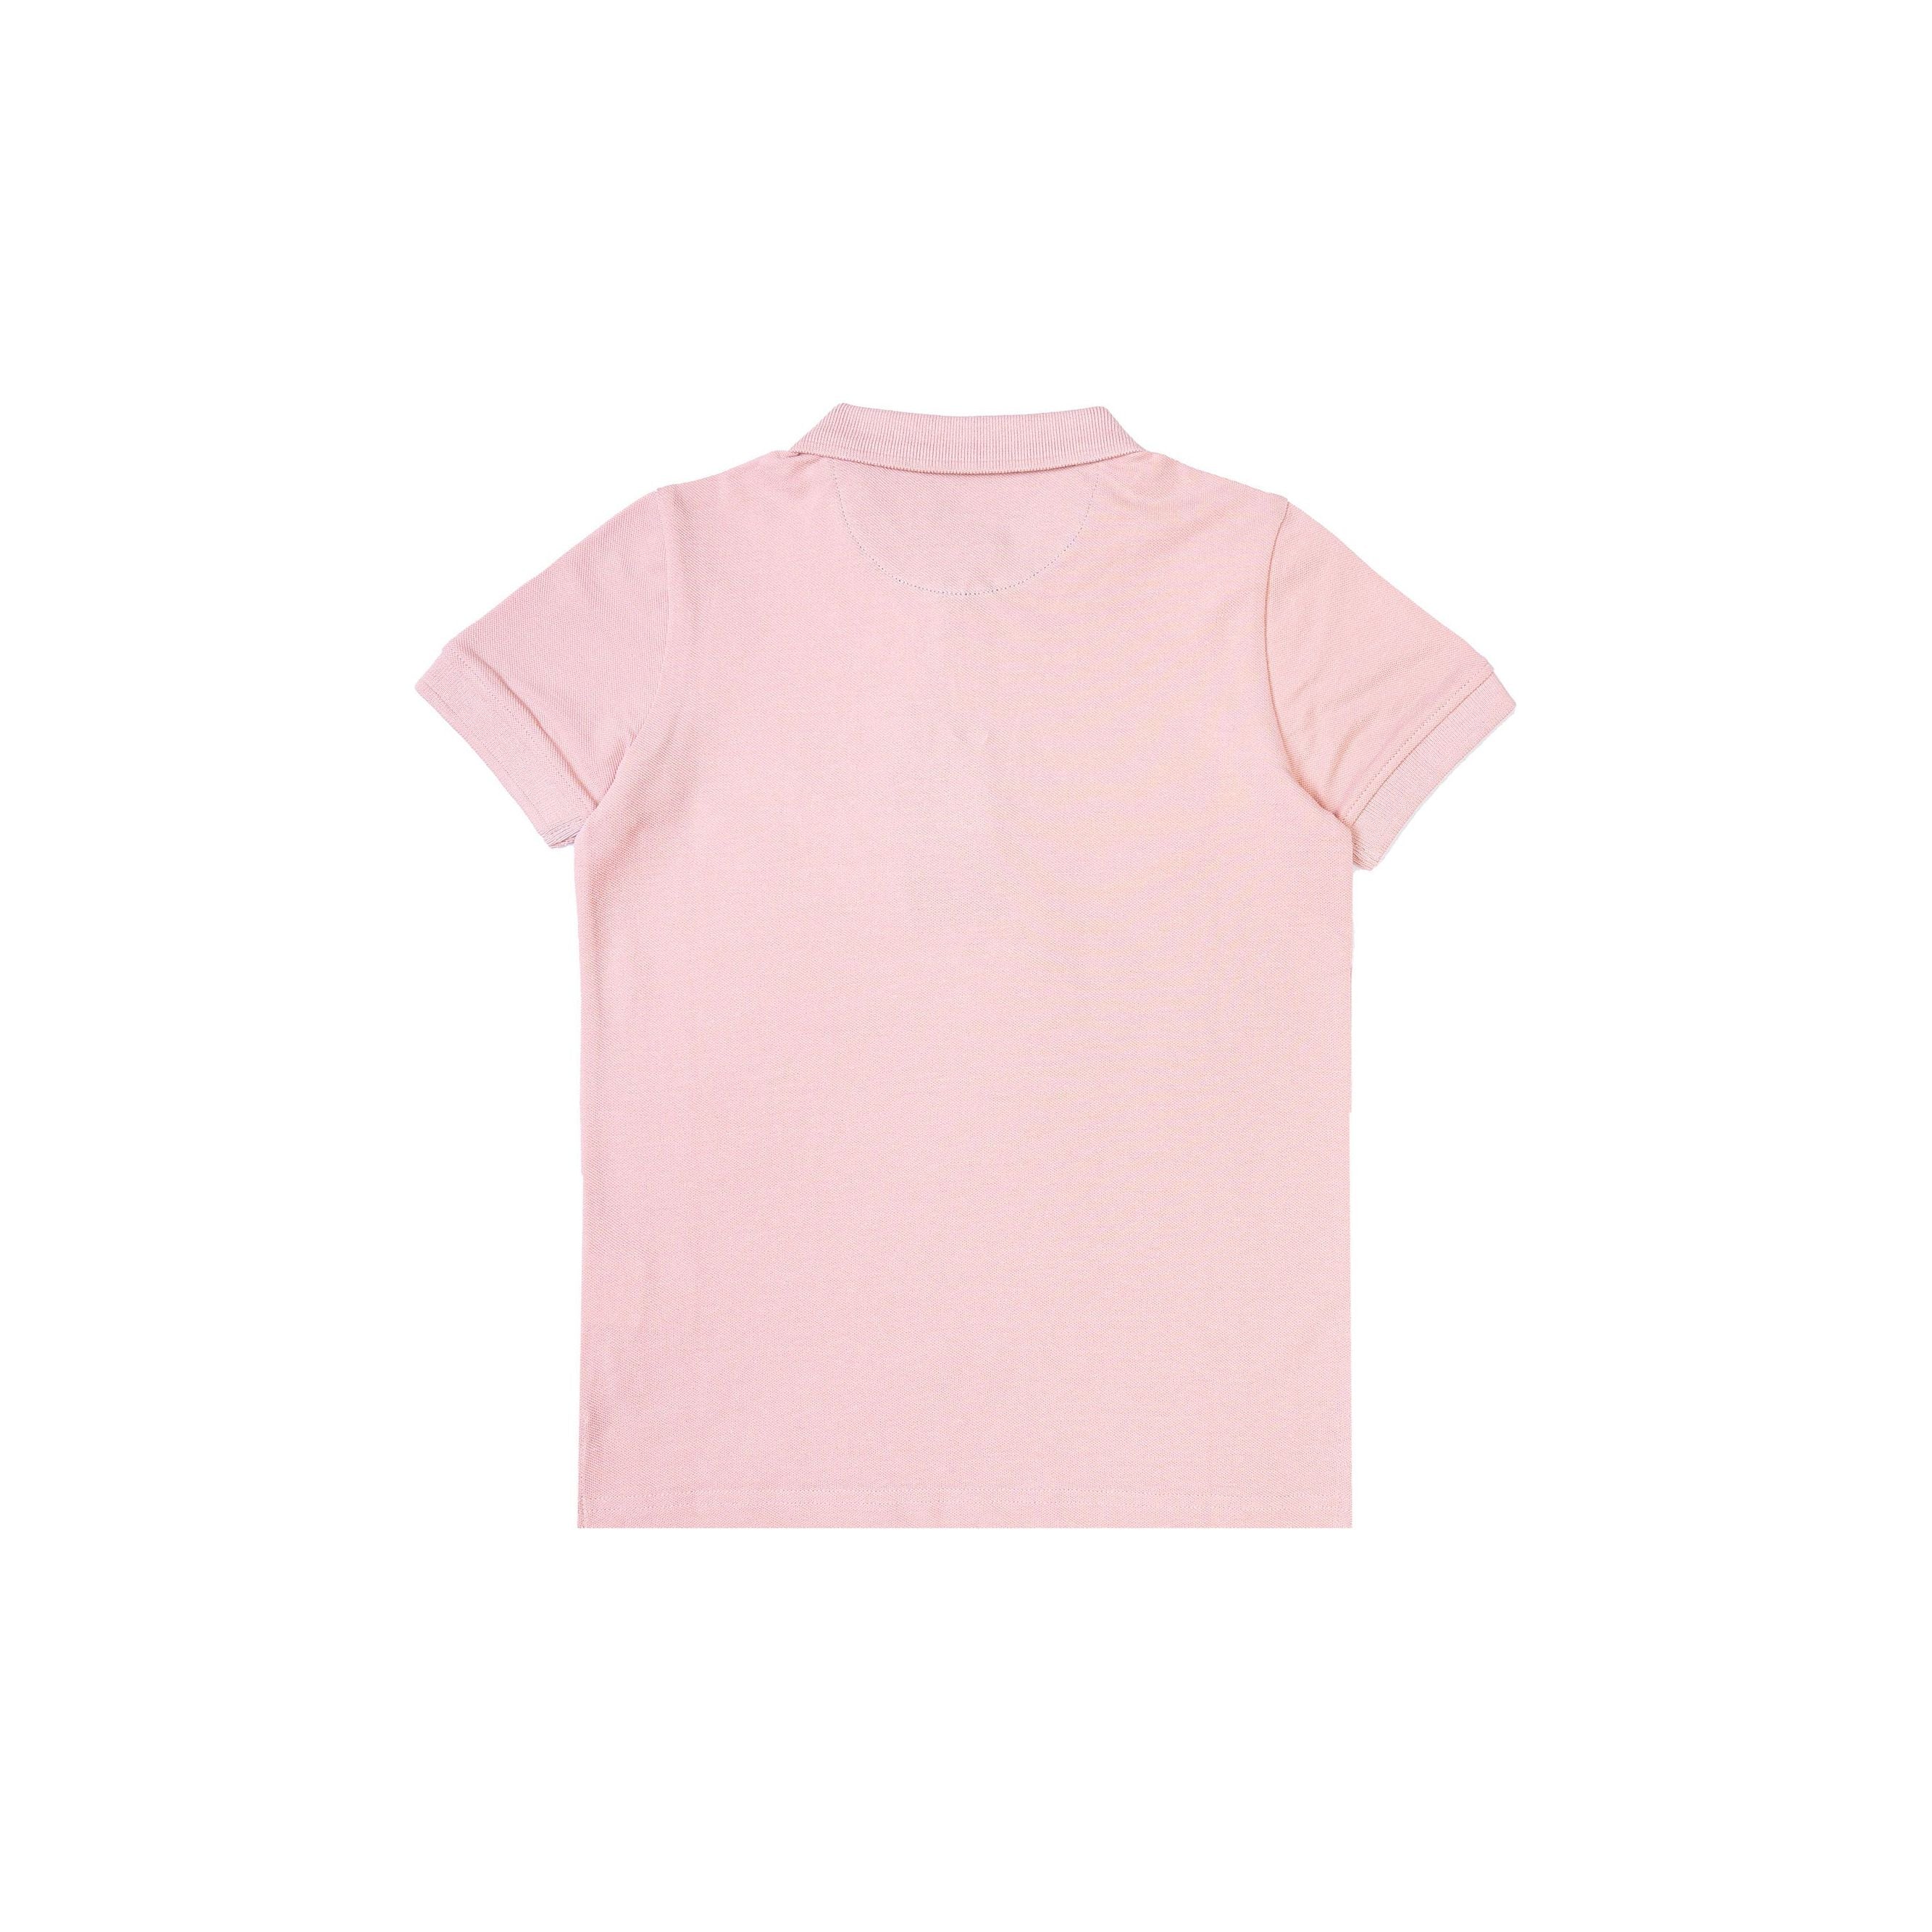 Silver Jeans - Boys Polo in Soft Pink